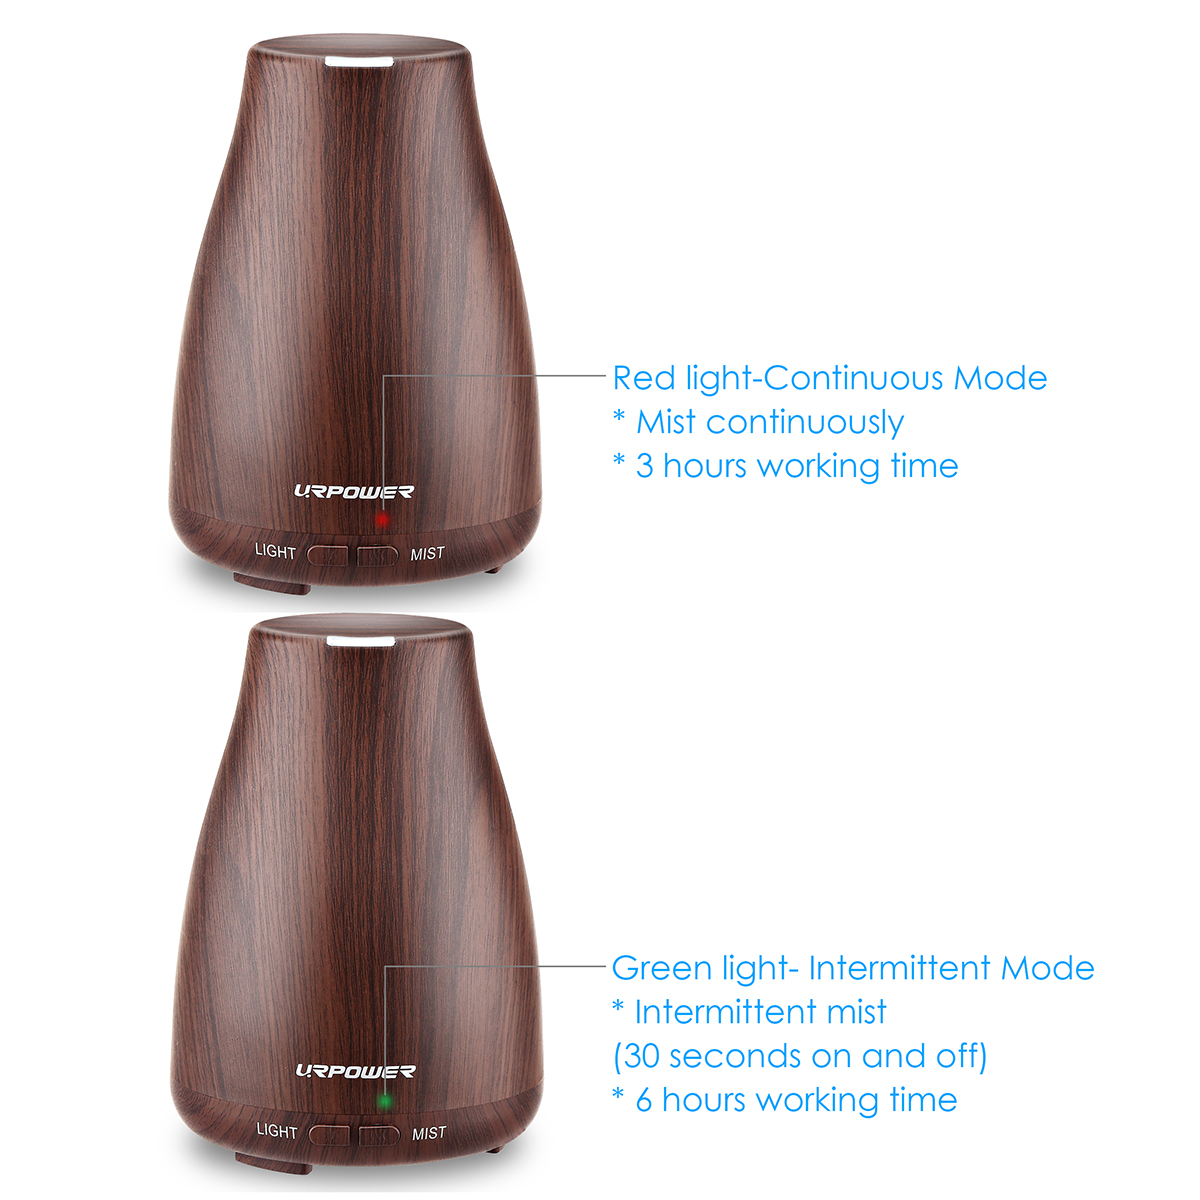 URPOWER 2nd Version Essential Oil Diffuser Aroma Essential Oil Cool Mist Humidifier with Adjustable Mist Mode,Waterless Auto Shut-Off and 7 Color Lights Changing for Home Office Baby